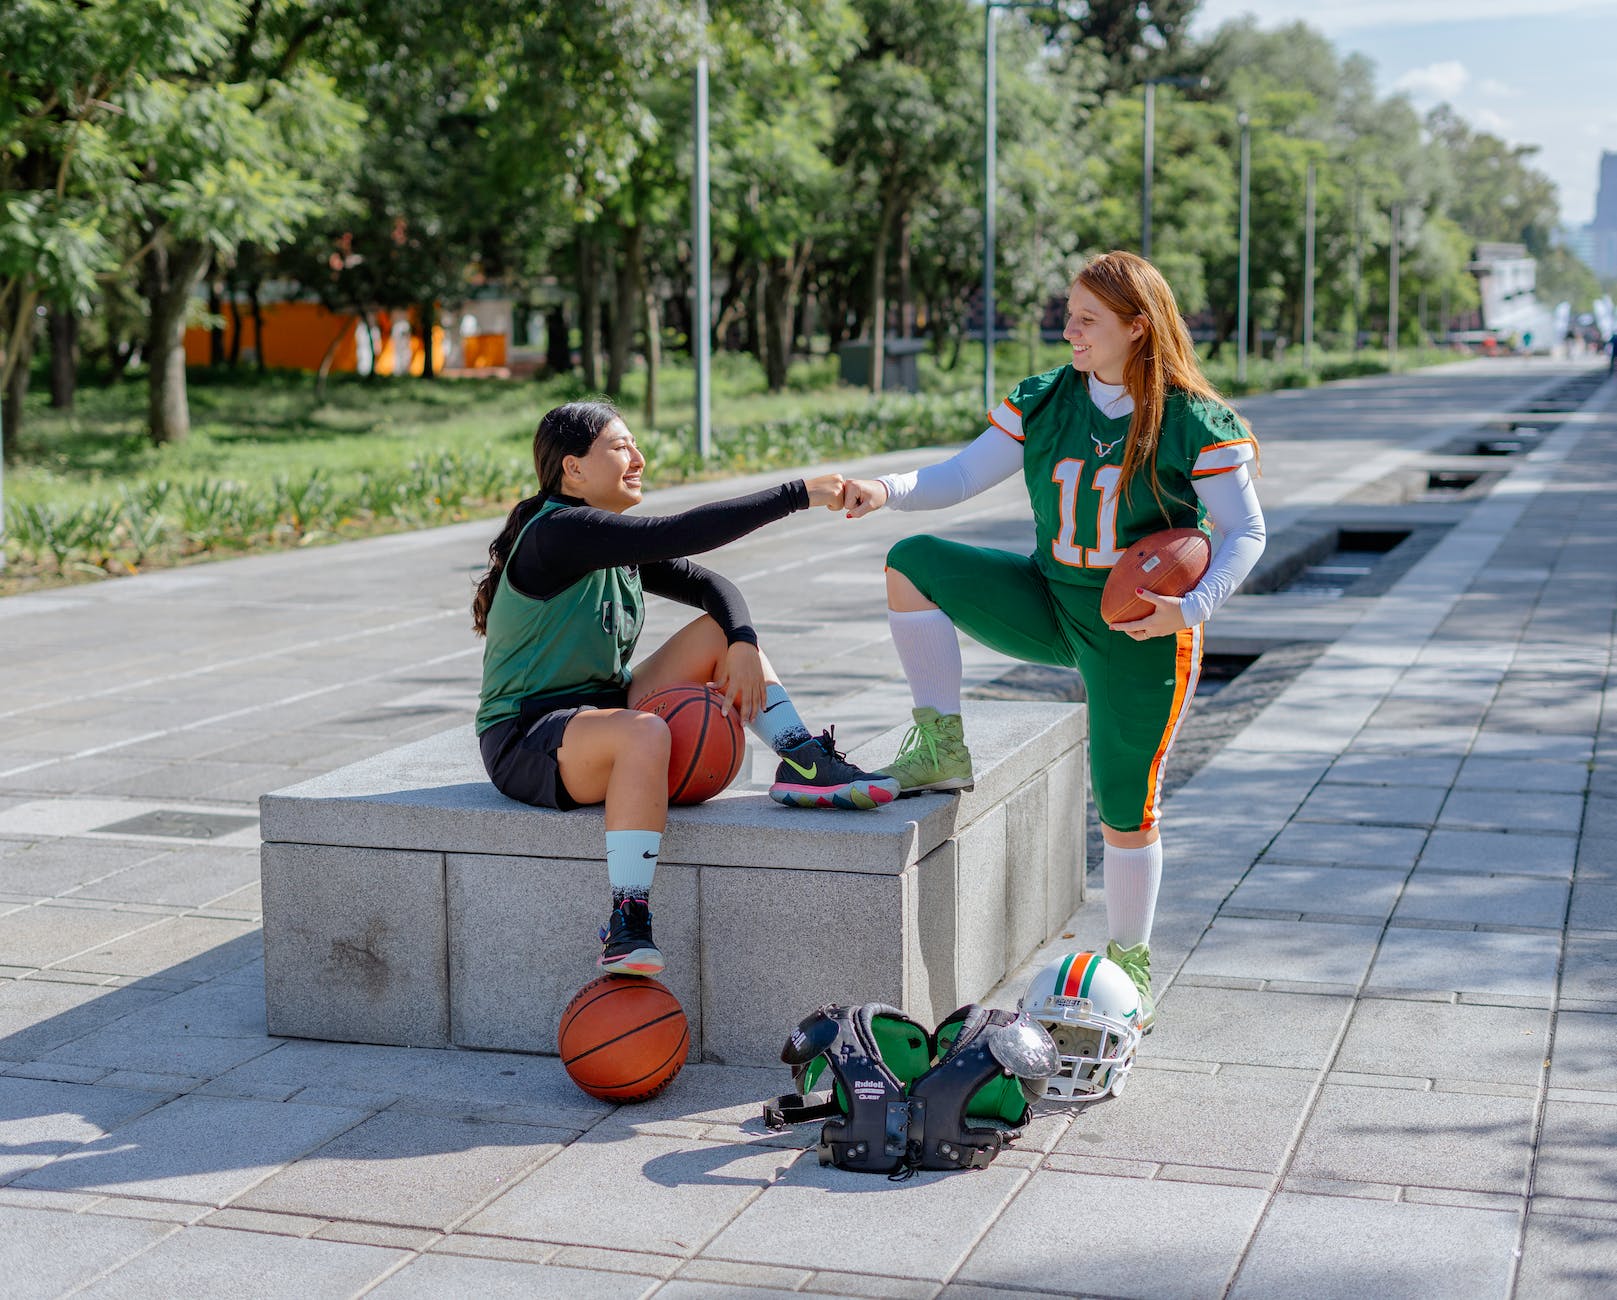 girl in basketball clothing and girl in american football clothing fist bumping